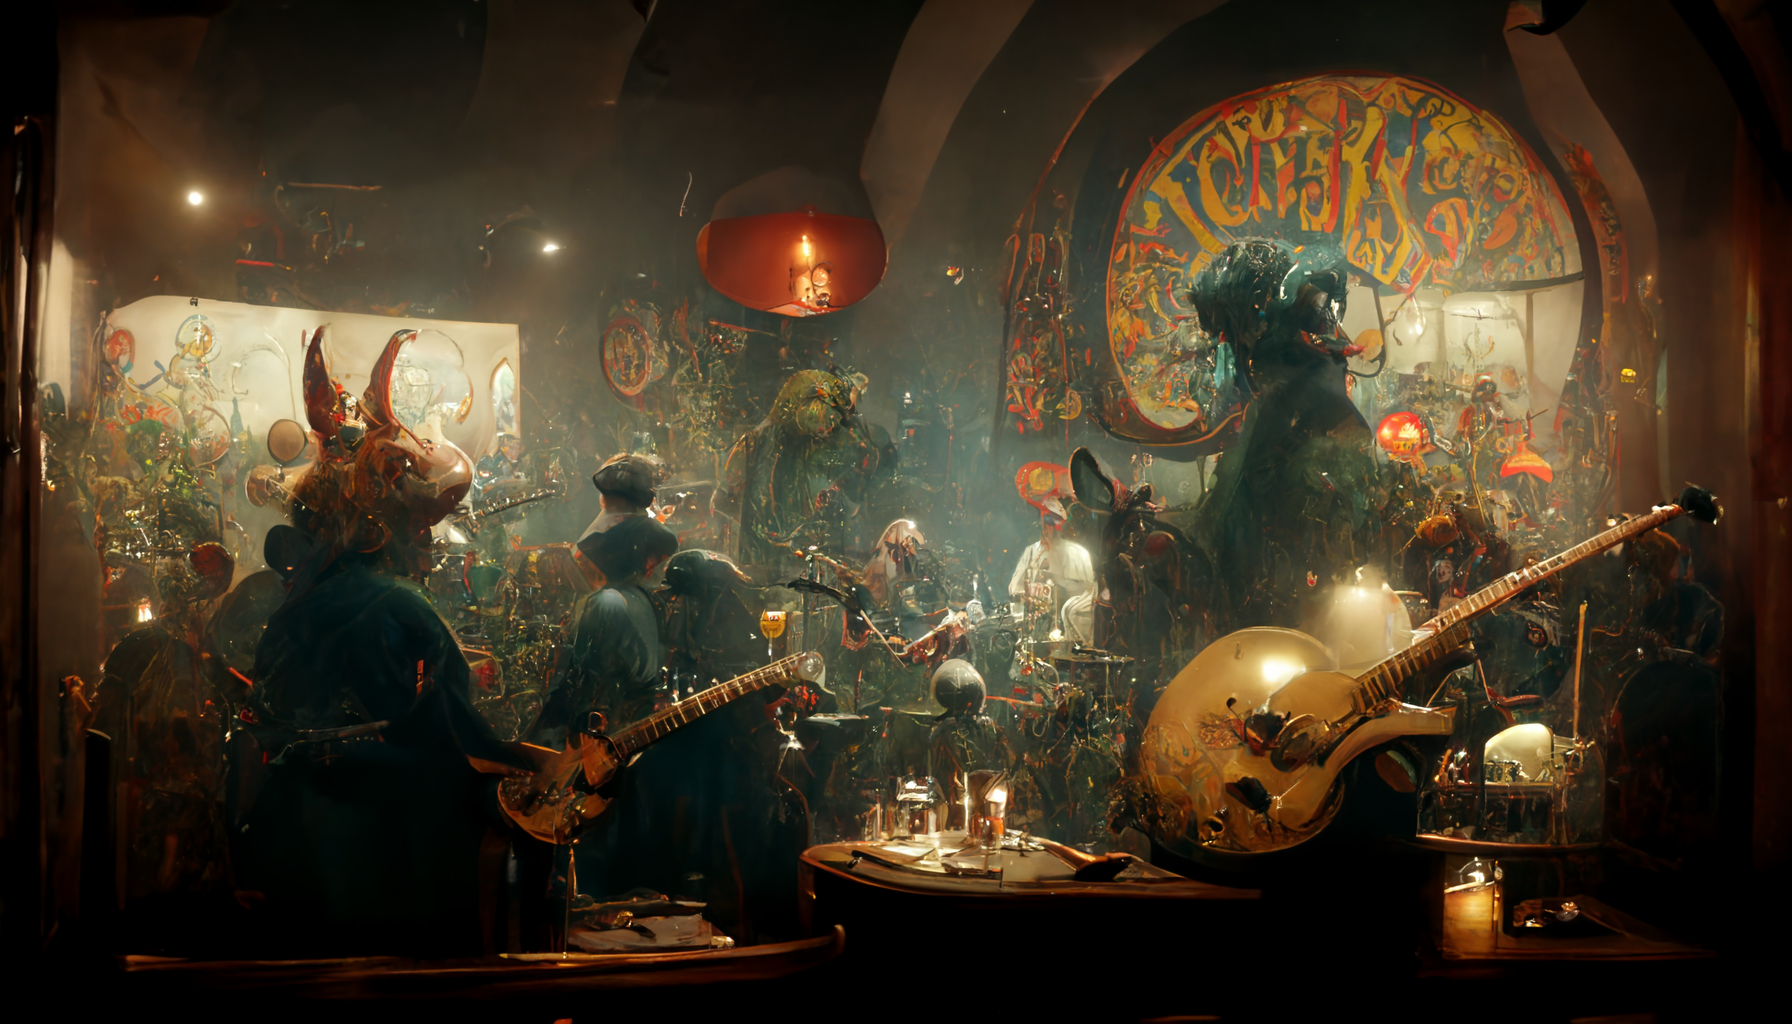 ZenithWombat_A_monster_rock_band_playing_a_gig_in_a_small_bar_i_d3fc958d-83c9-45d1-a591-522b9ee12218.png